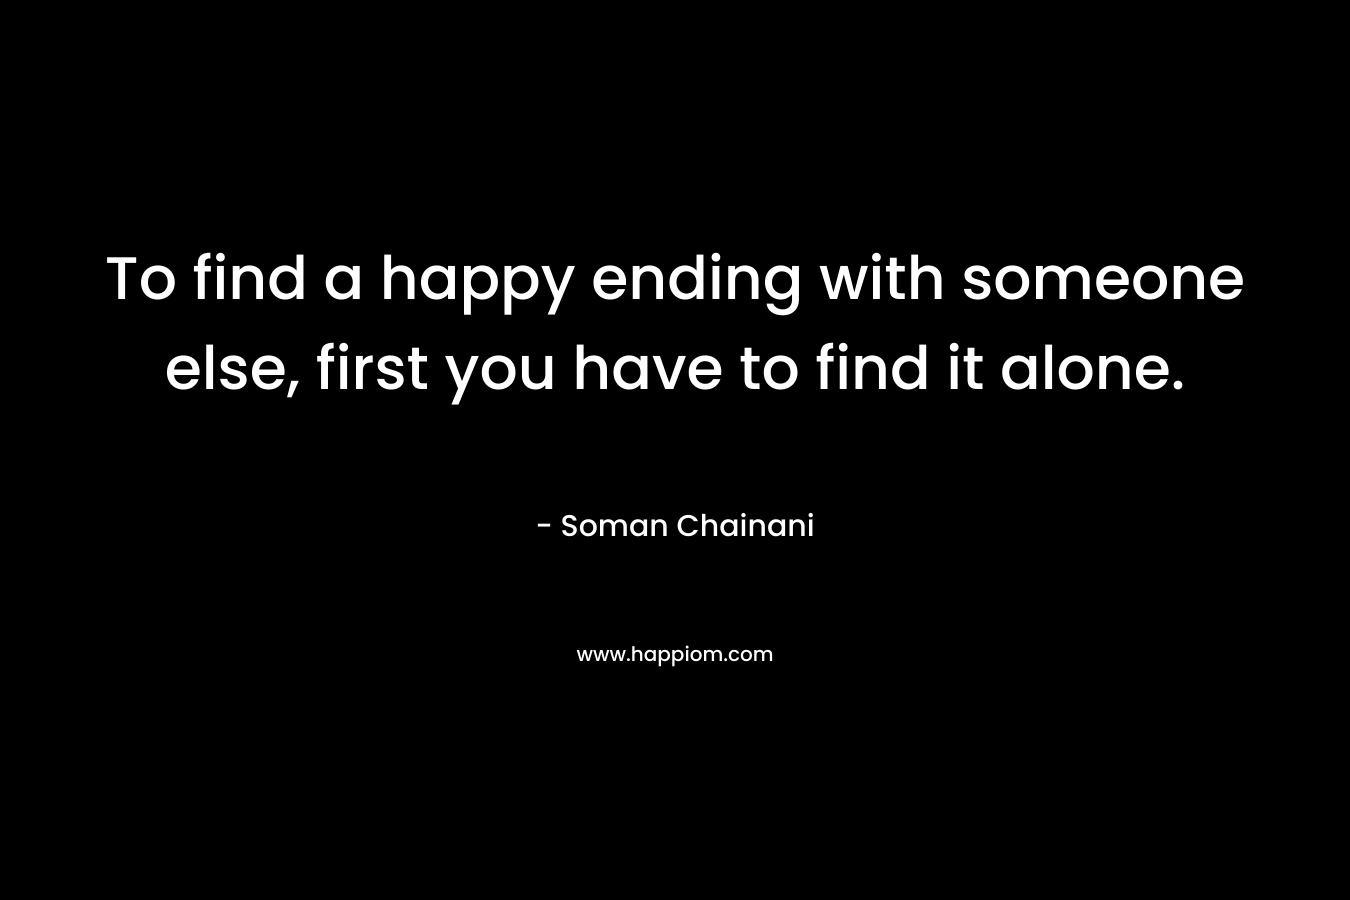 To find a happy ending with someone else, first you have to find it alone. – Soman Chainani